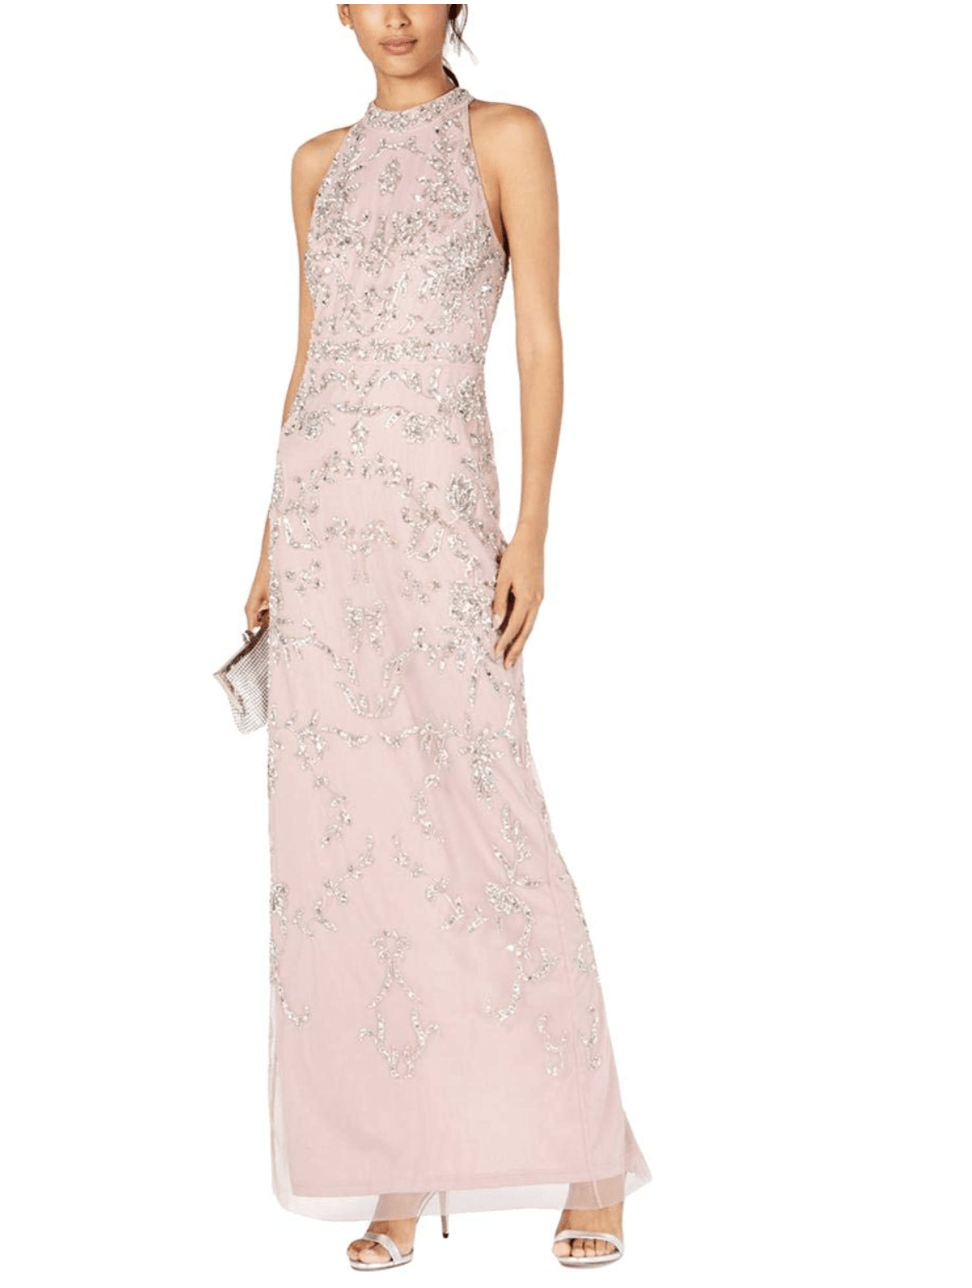 Top fashion pink halter column dress with silver sequin details